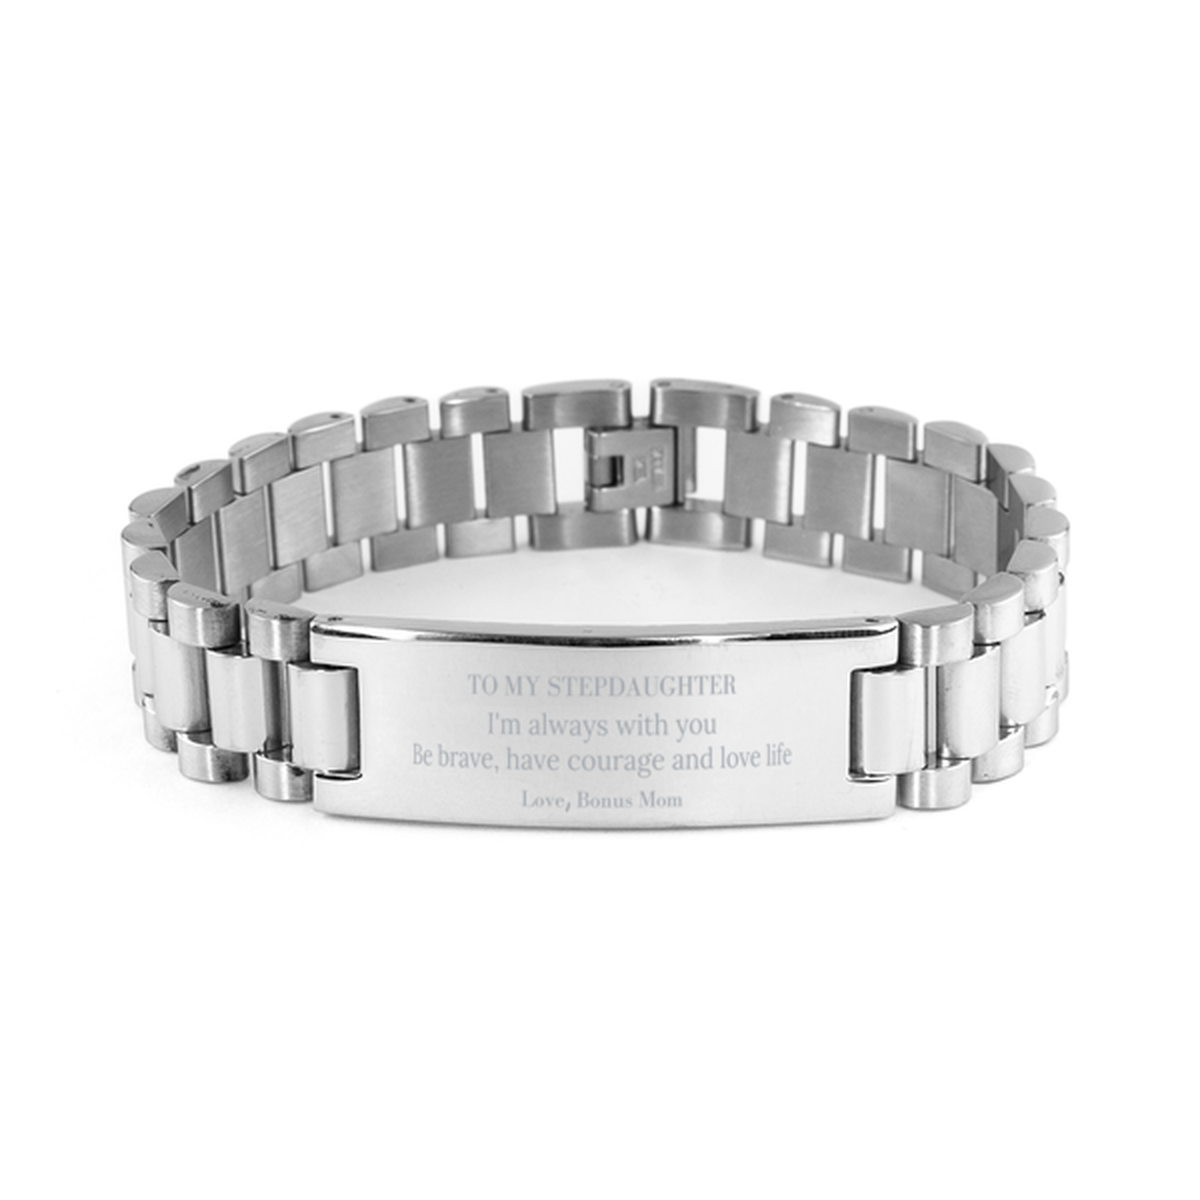 To My Stepdaughter Gifts from Bonus Mom, Unique Ladder Stainless Steel Bracelet Inspirational Christmas Birthday Graduation Gifts for Stepdaughter I'm always with you. Be brave, have courage and love life. Love, Bonus Mom